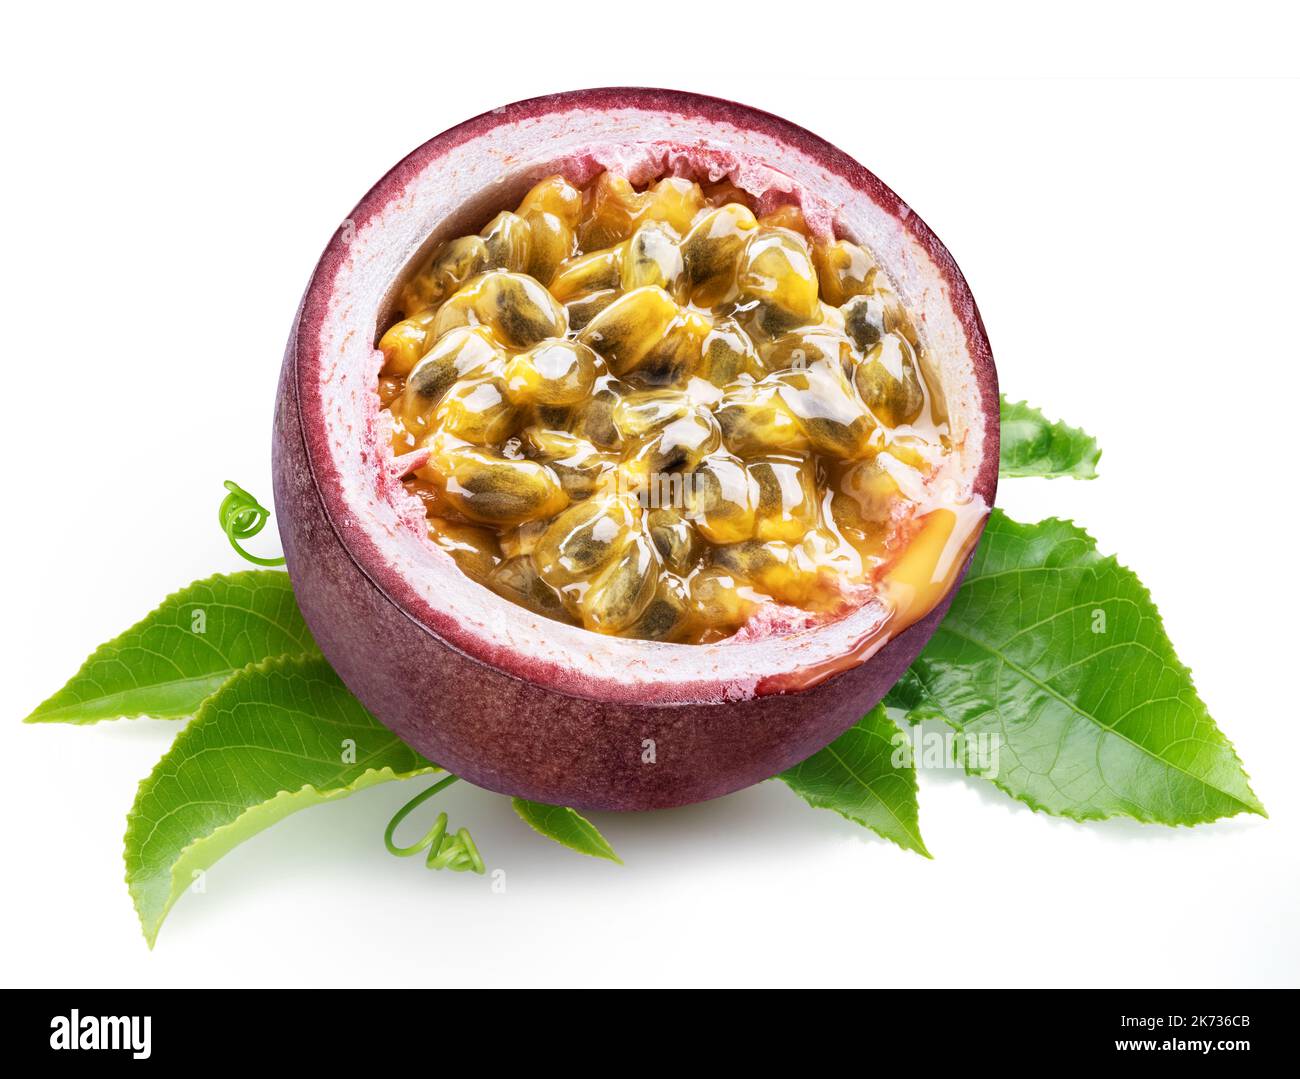 Dark purple passion fruit half with seedy interior laying on green passiflora leaves on white background. Stock Photo